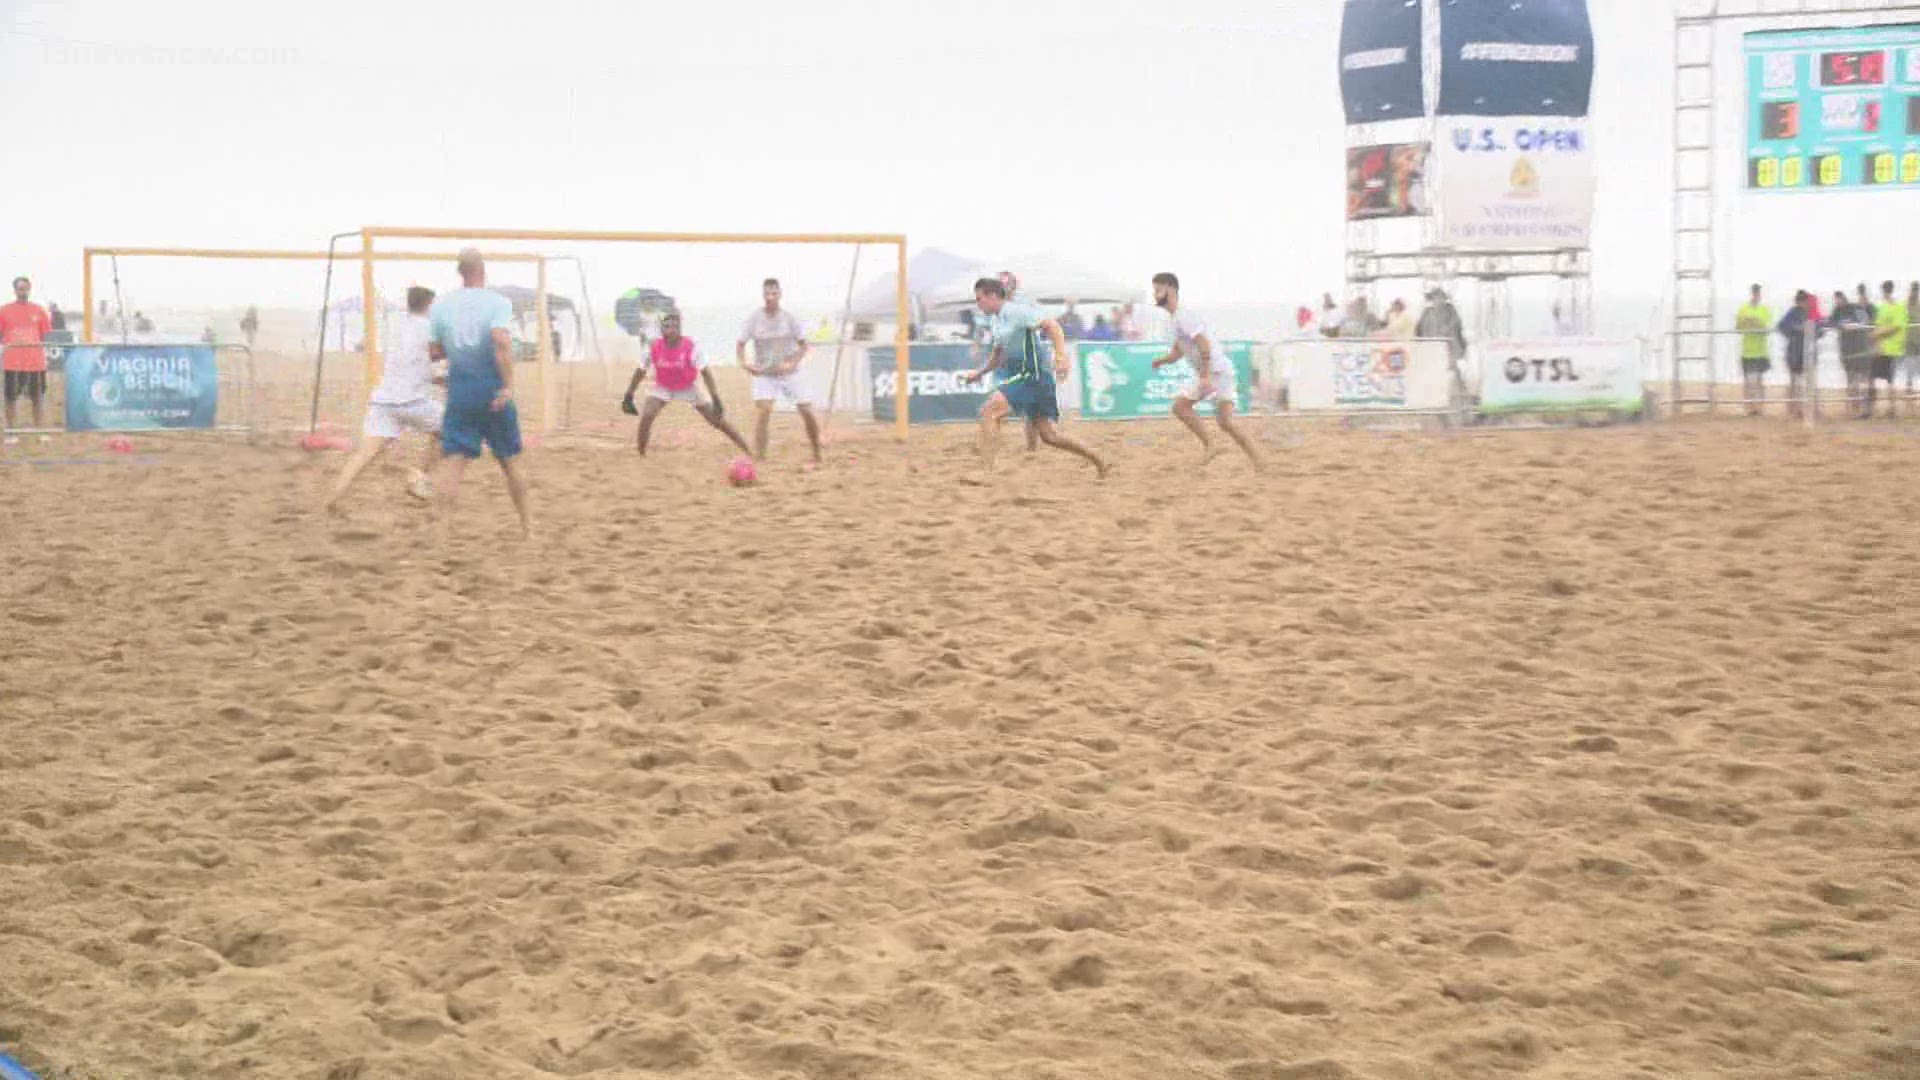 Professional games at the North American Sand Soccer Championships officially kicked off Saturday morning.